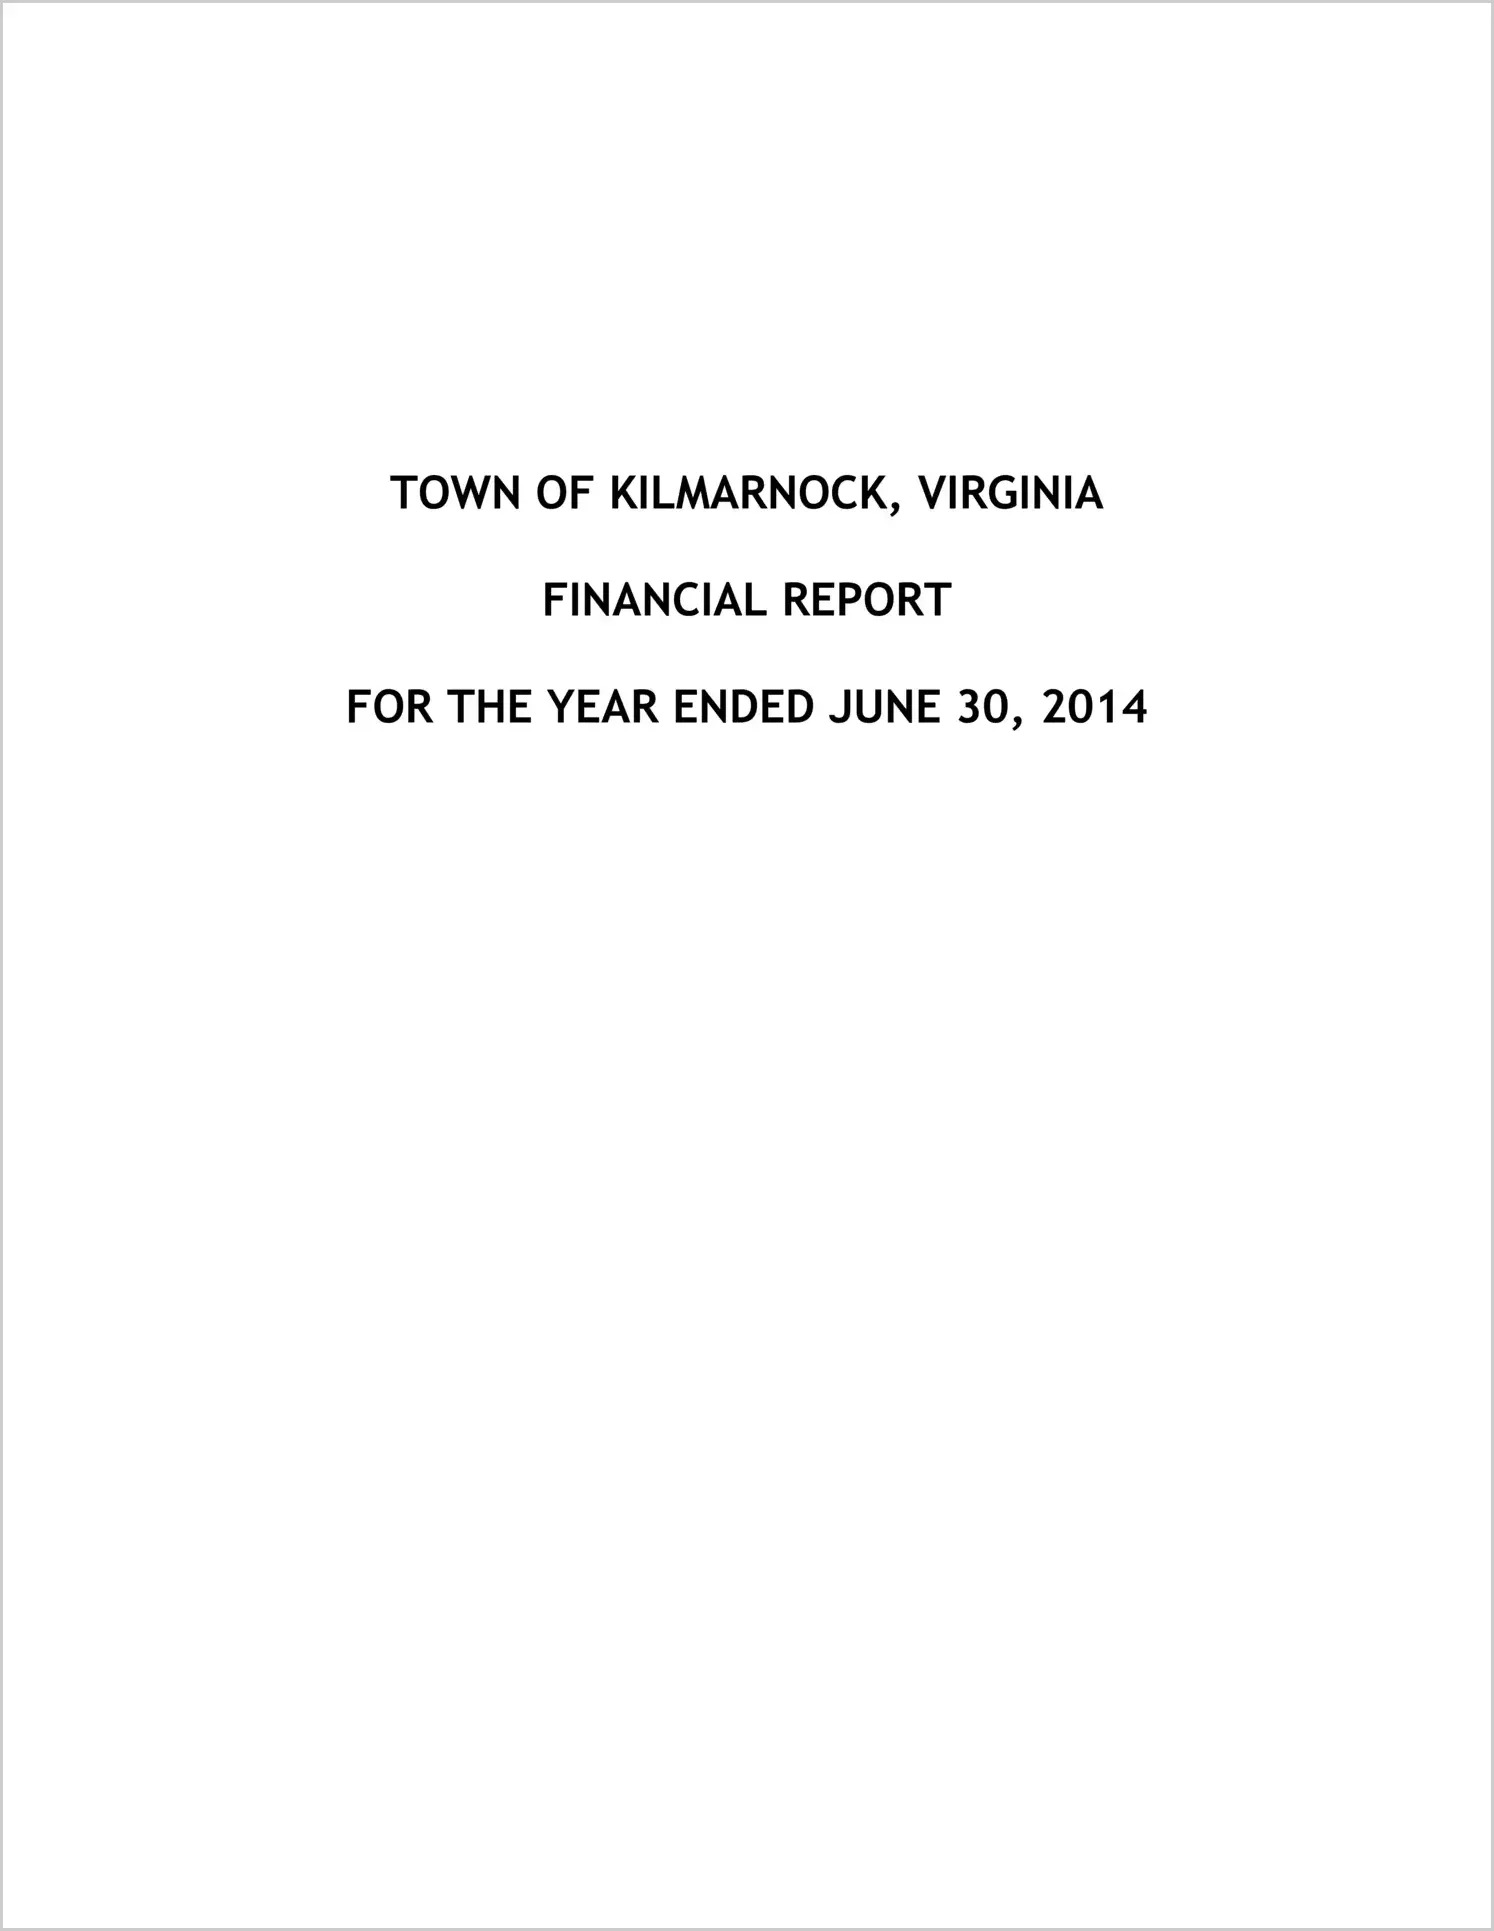 2014 Annual Financial Report for Town of Kilmarnock